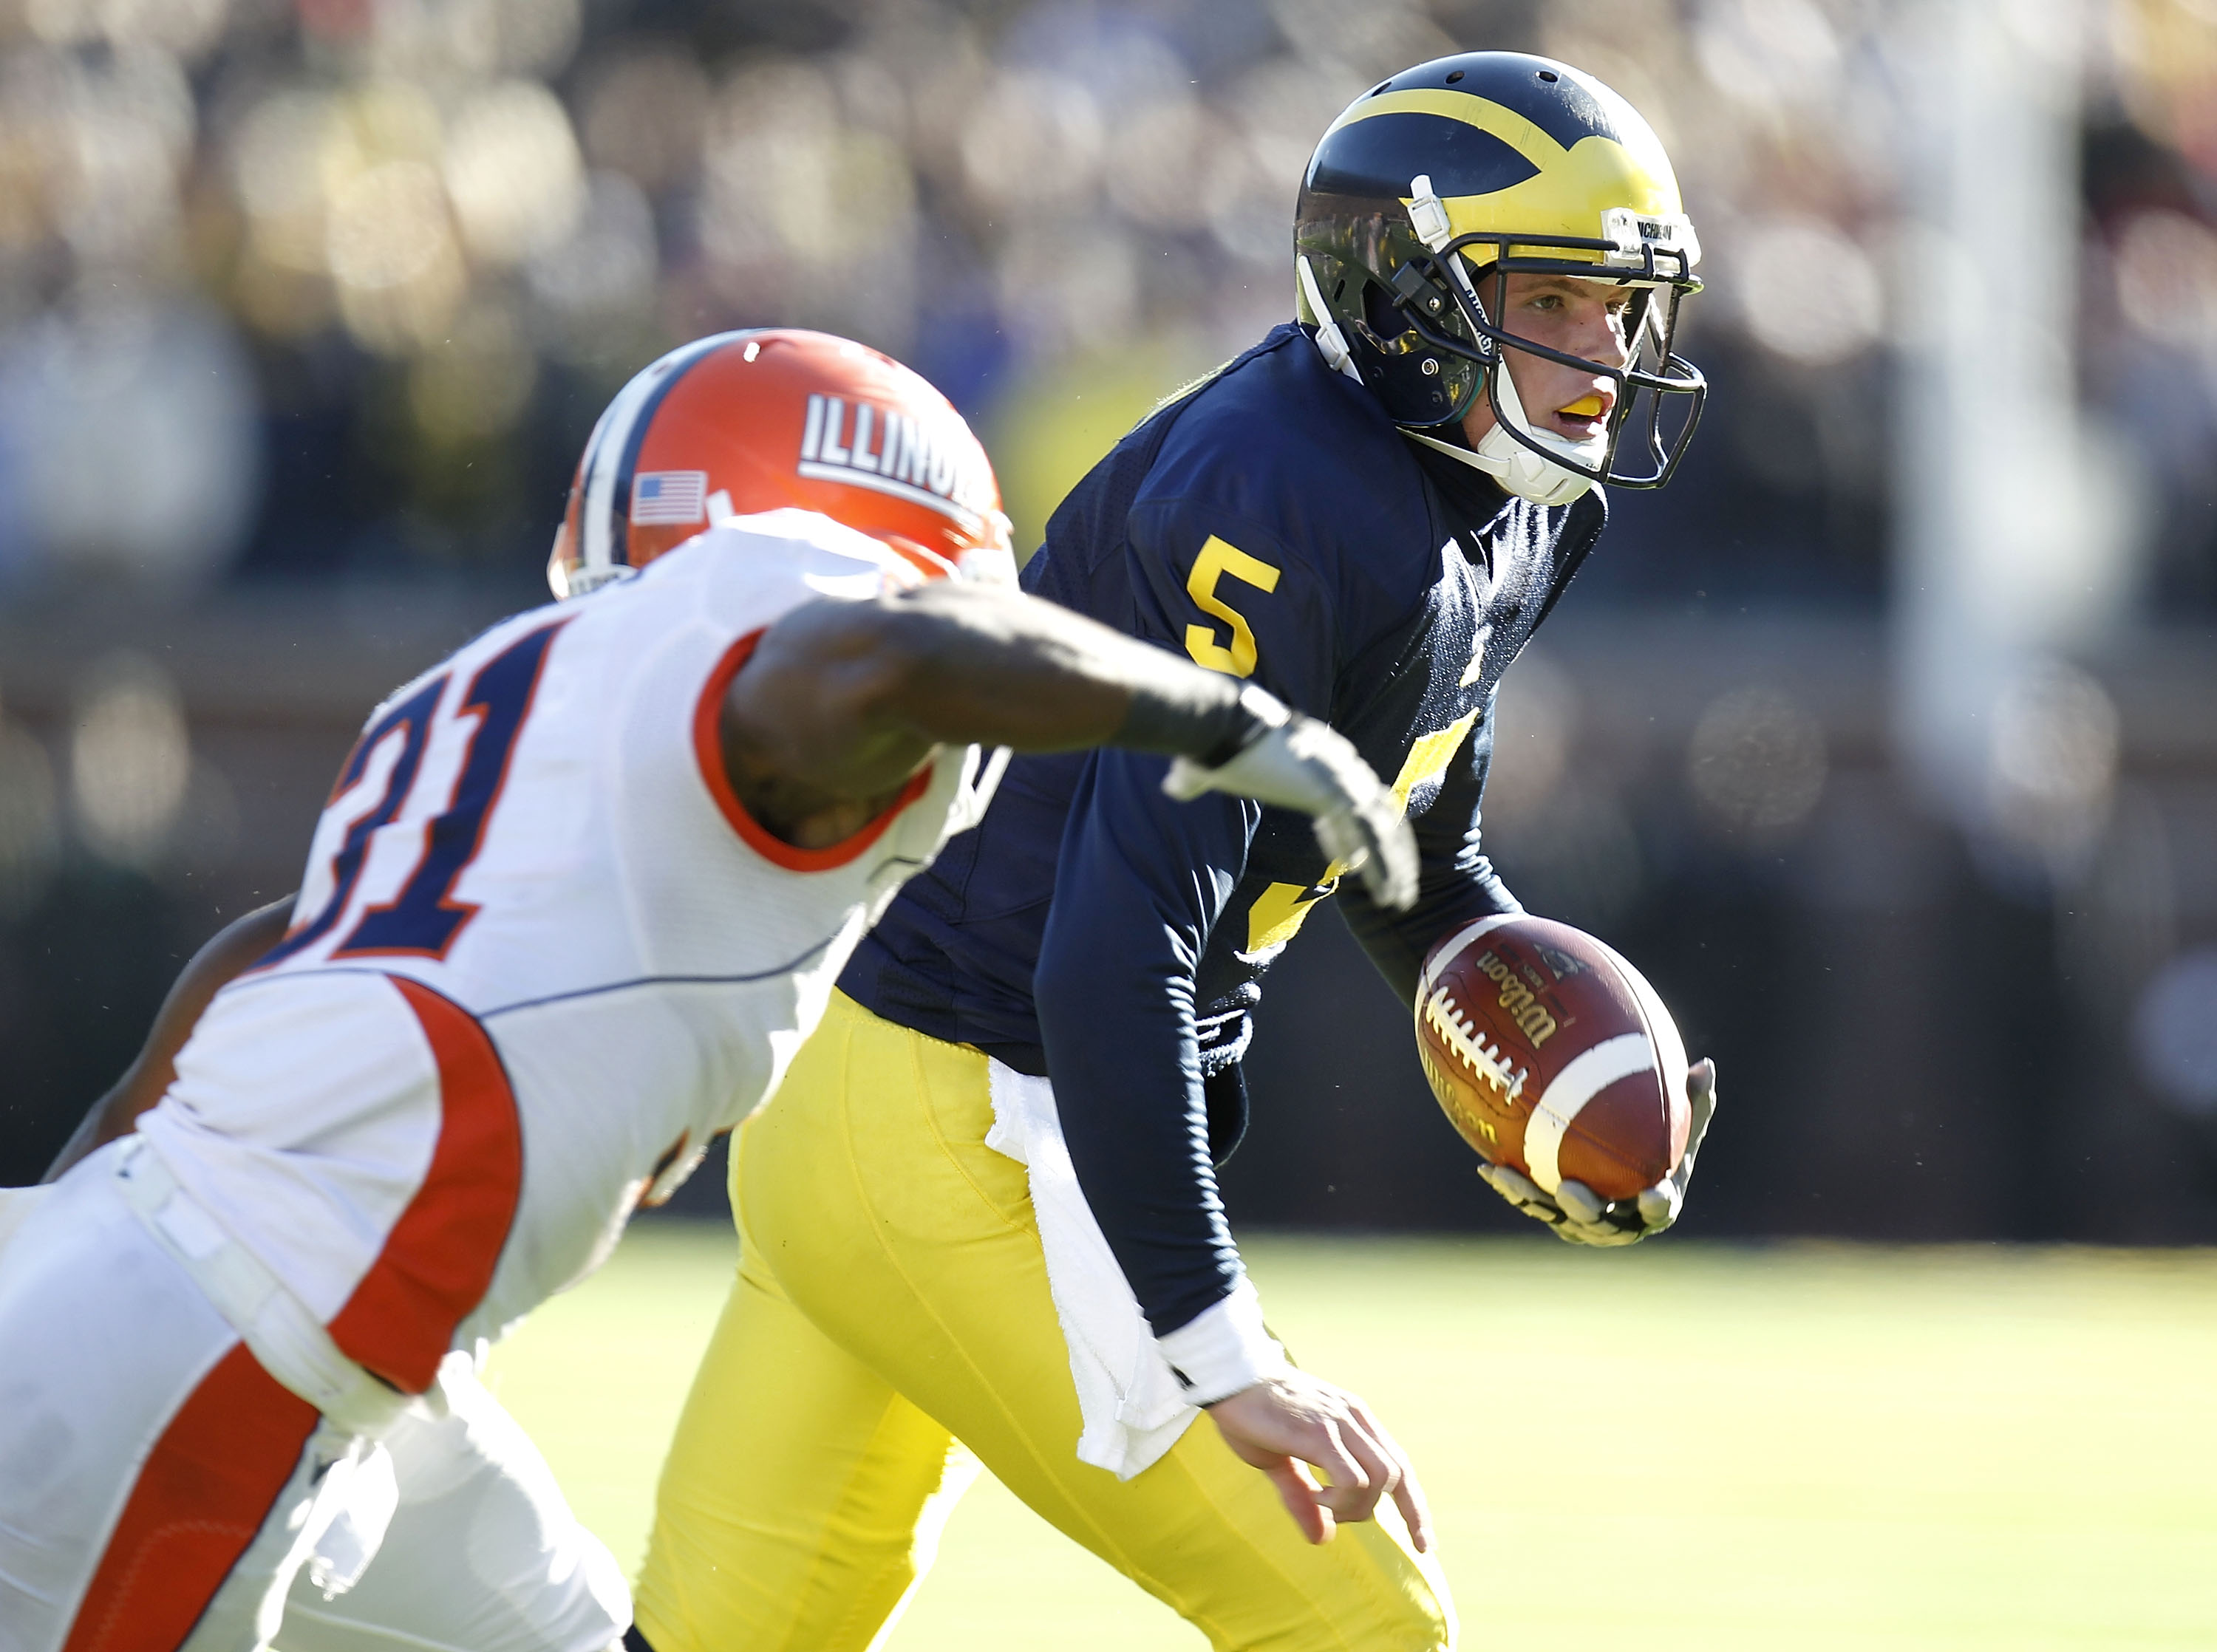 ANN ARBOR, MI - NOVEMBER 06:  Tate Forcier #5 of the Michigan Wolverines runs the ball in overtime while playing the Illinios Fighting Illini at Michigan Stadium on November 6, 2010 in Ann Arbor, Michigan.  (Photo by Gregory Shamus/Getty Images)